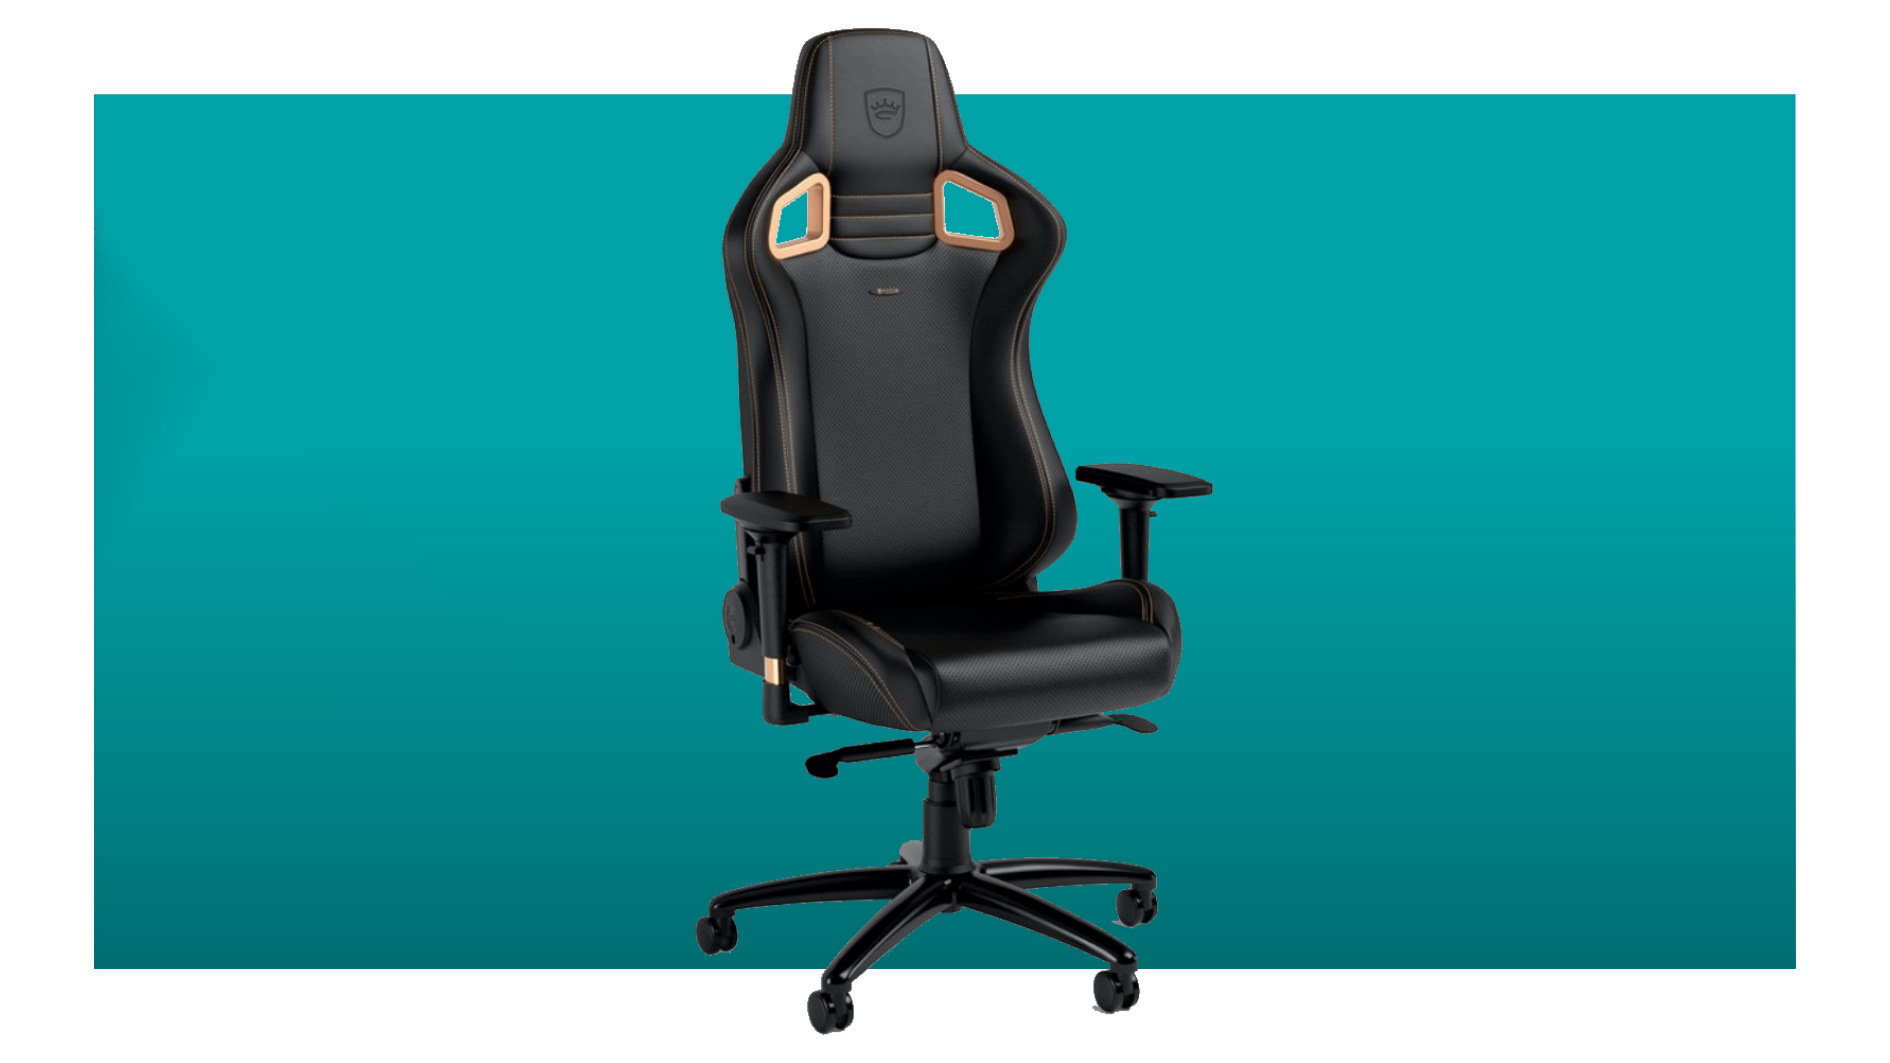  Save £45 on this Noblechairs Epic gaming chair right now 